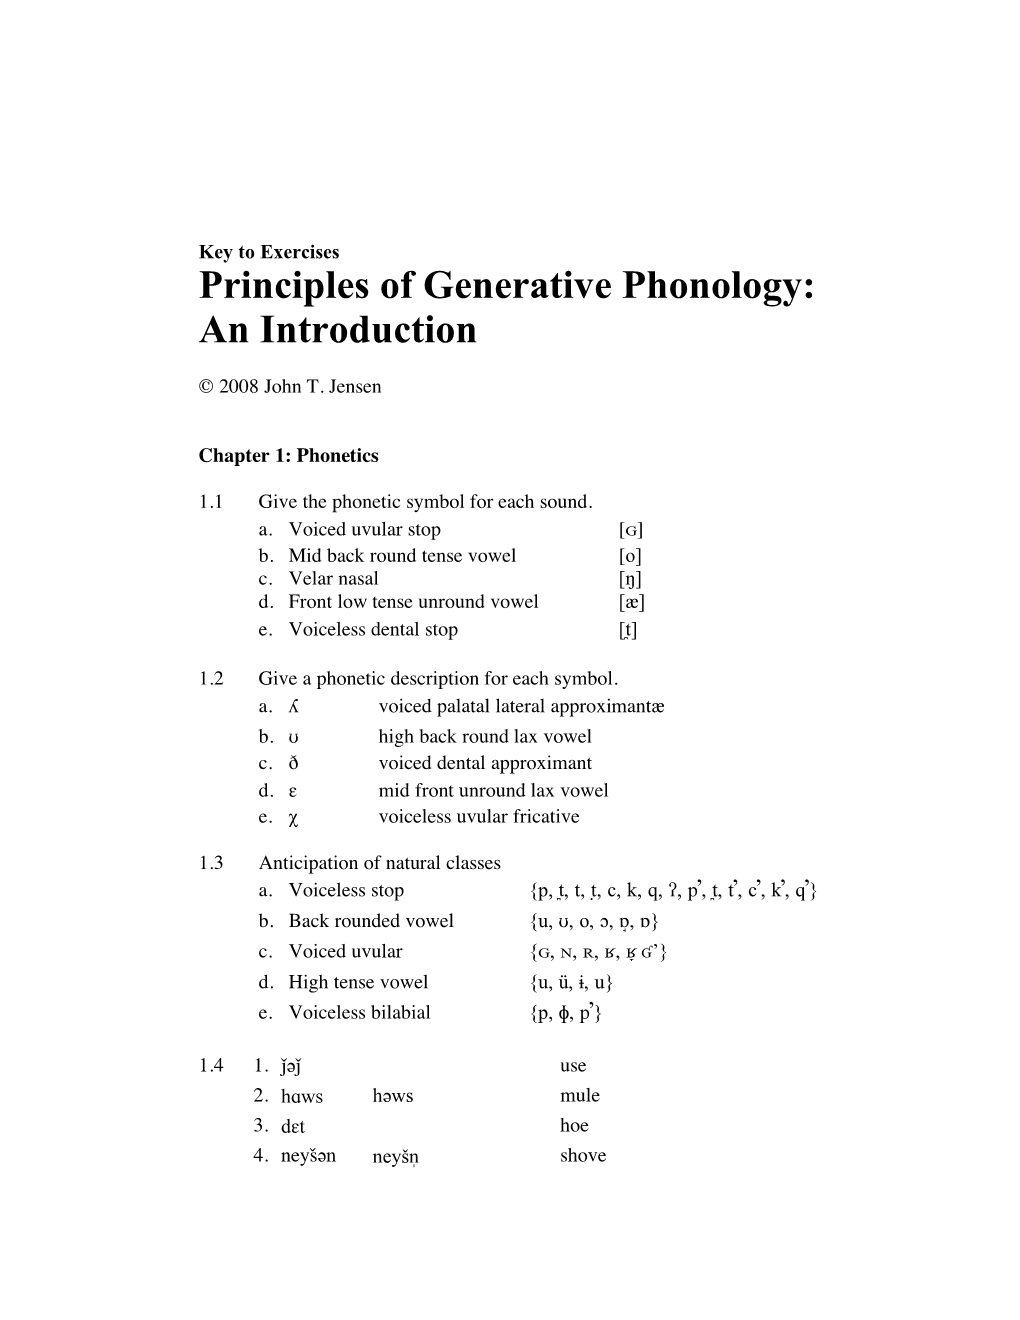 Principles of Generative Phonology: an Introduction